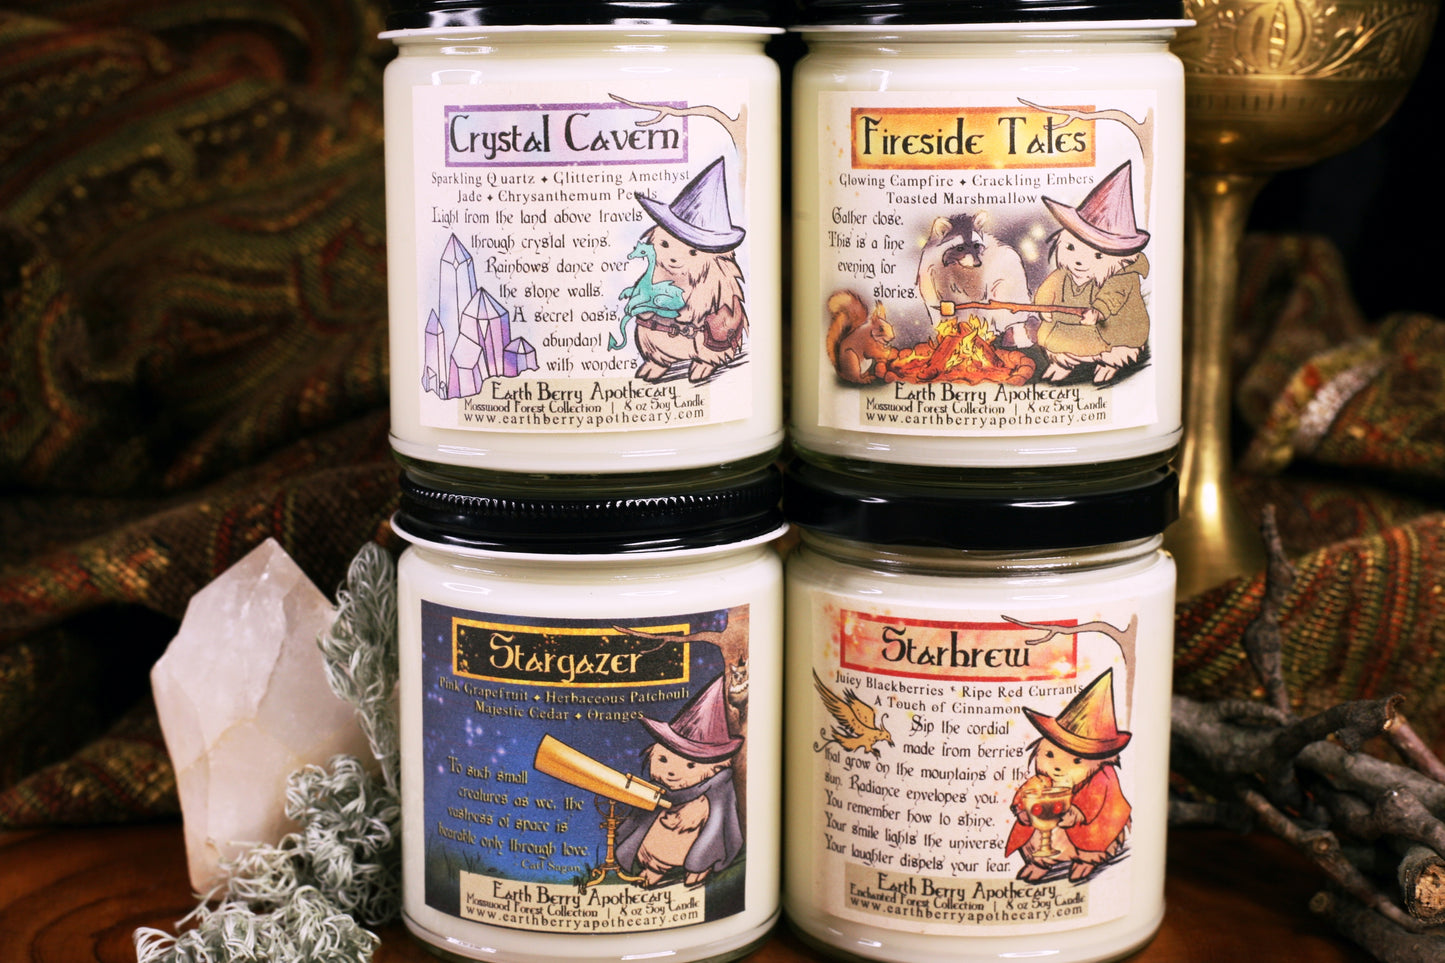 Unique scented soy candles. A hedgehog hedge witch at various activities on the labels. 